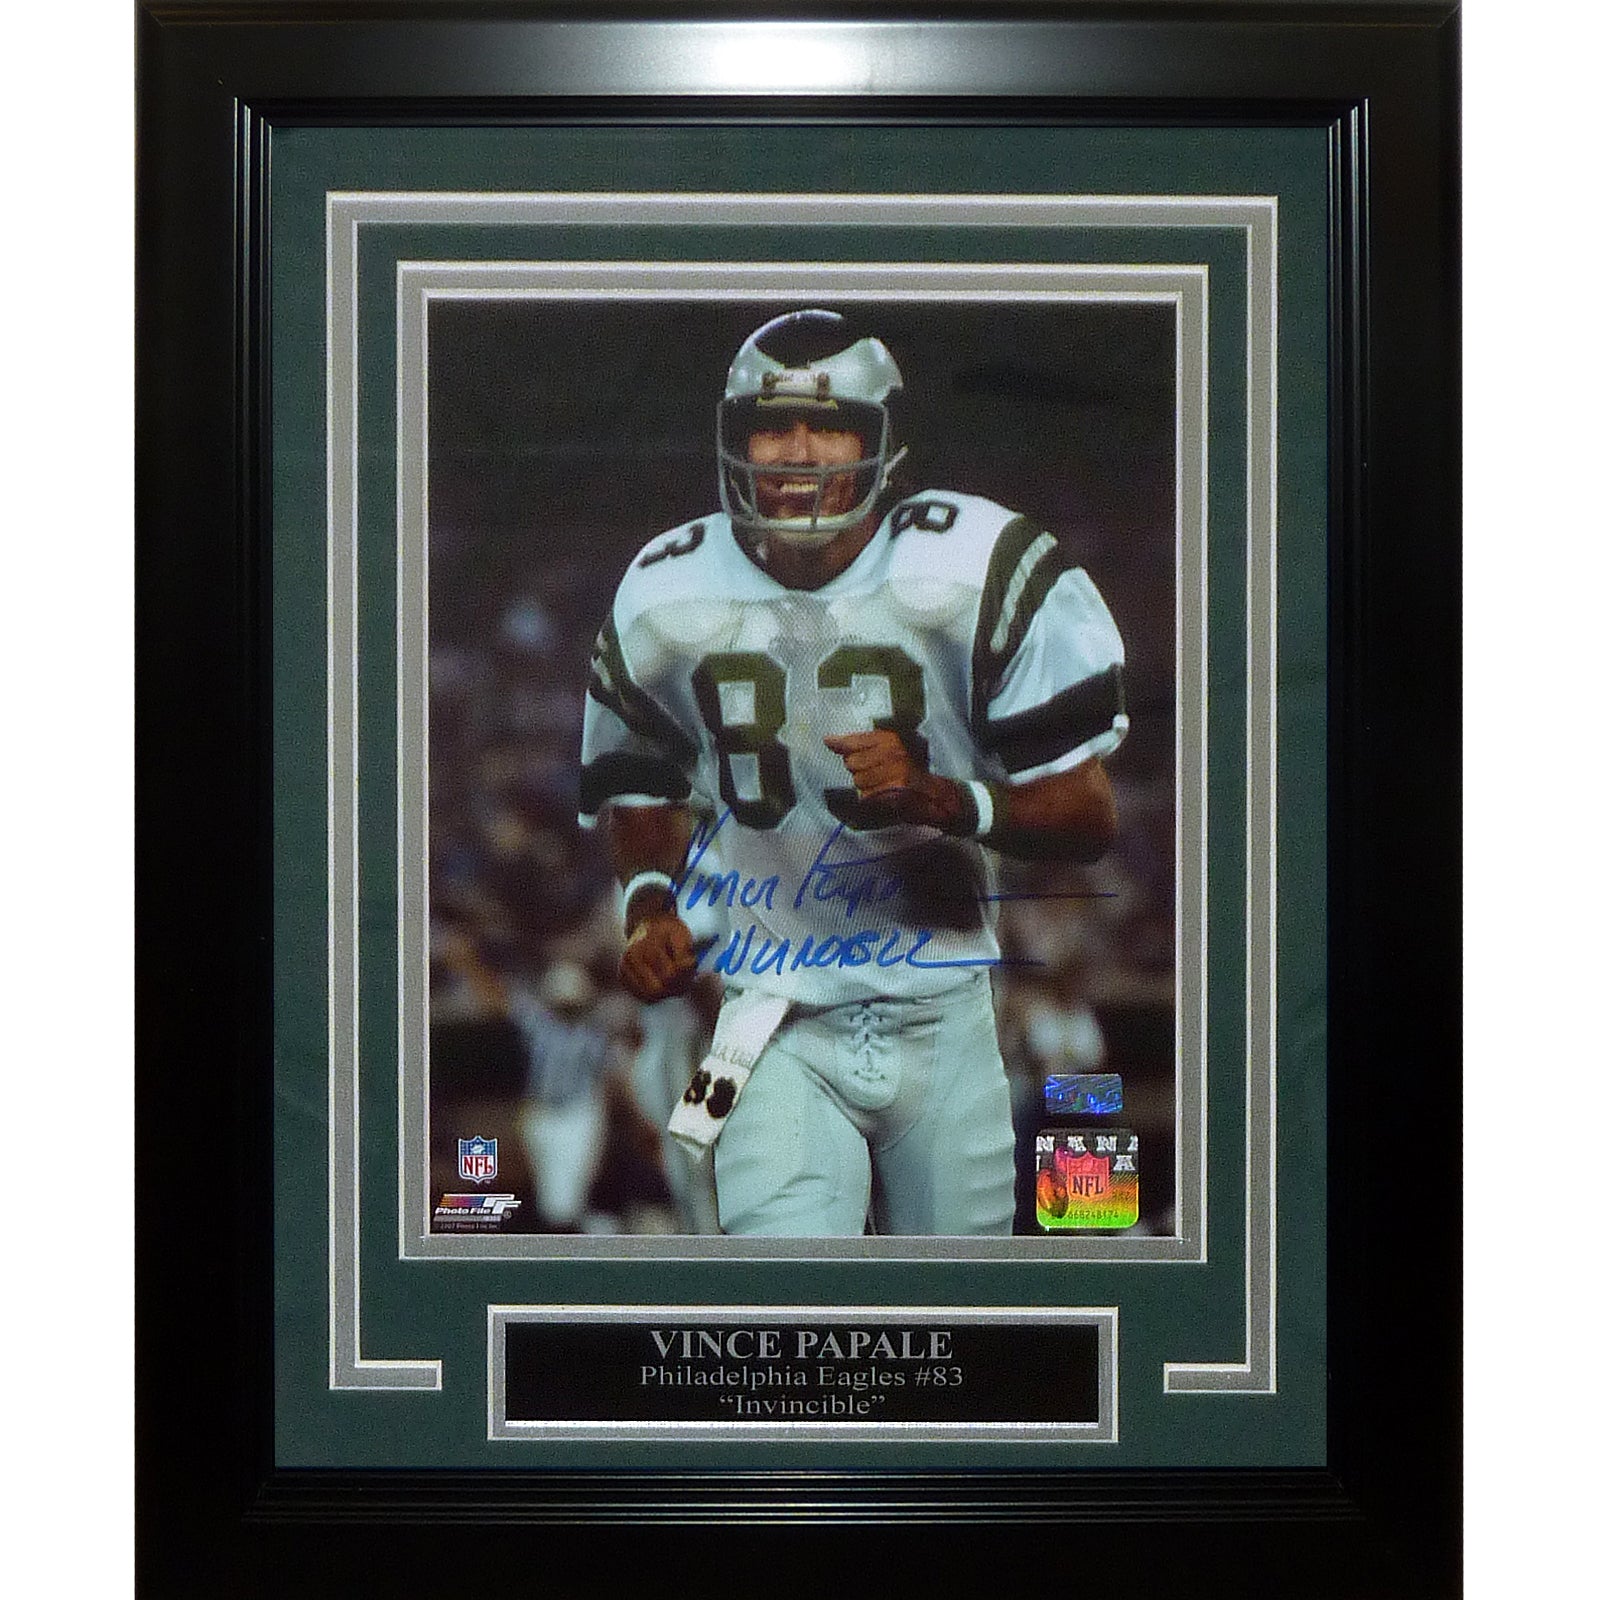 Vince Papale Autographed Philadelphia Eagles Deluxe Framed 8x10 Photo w/ 